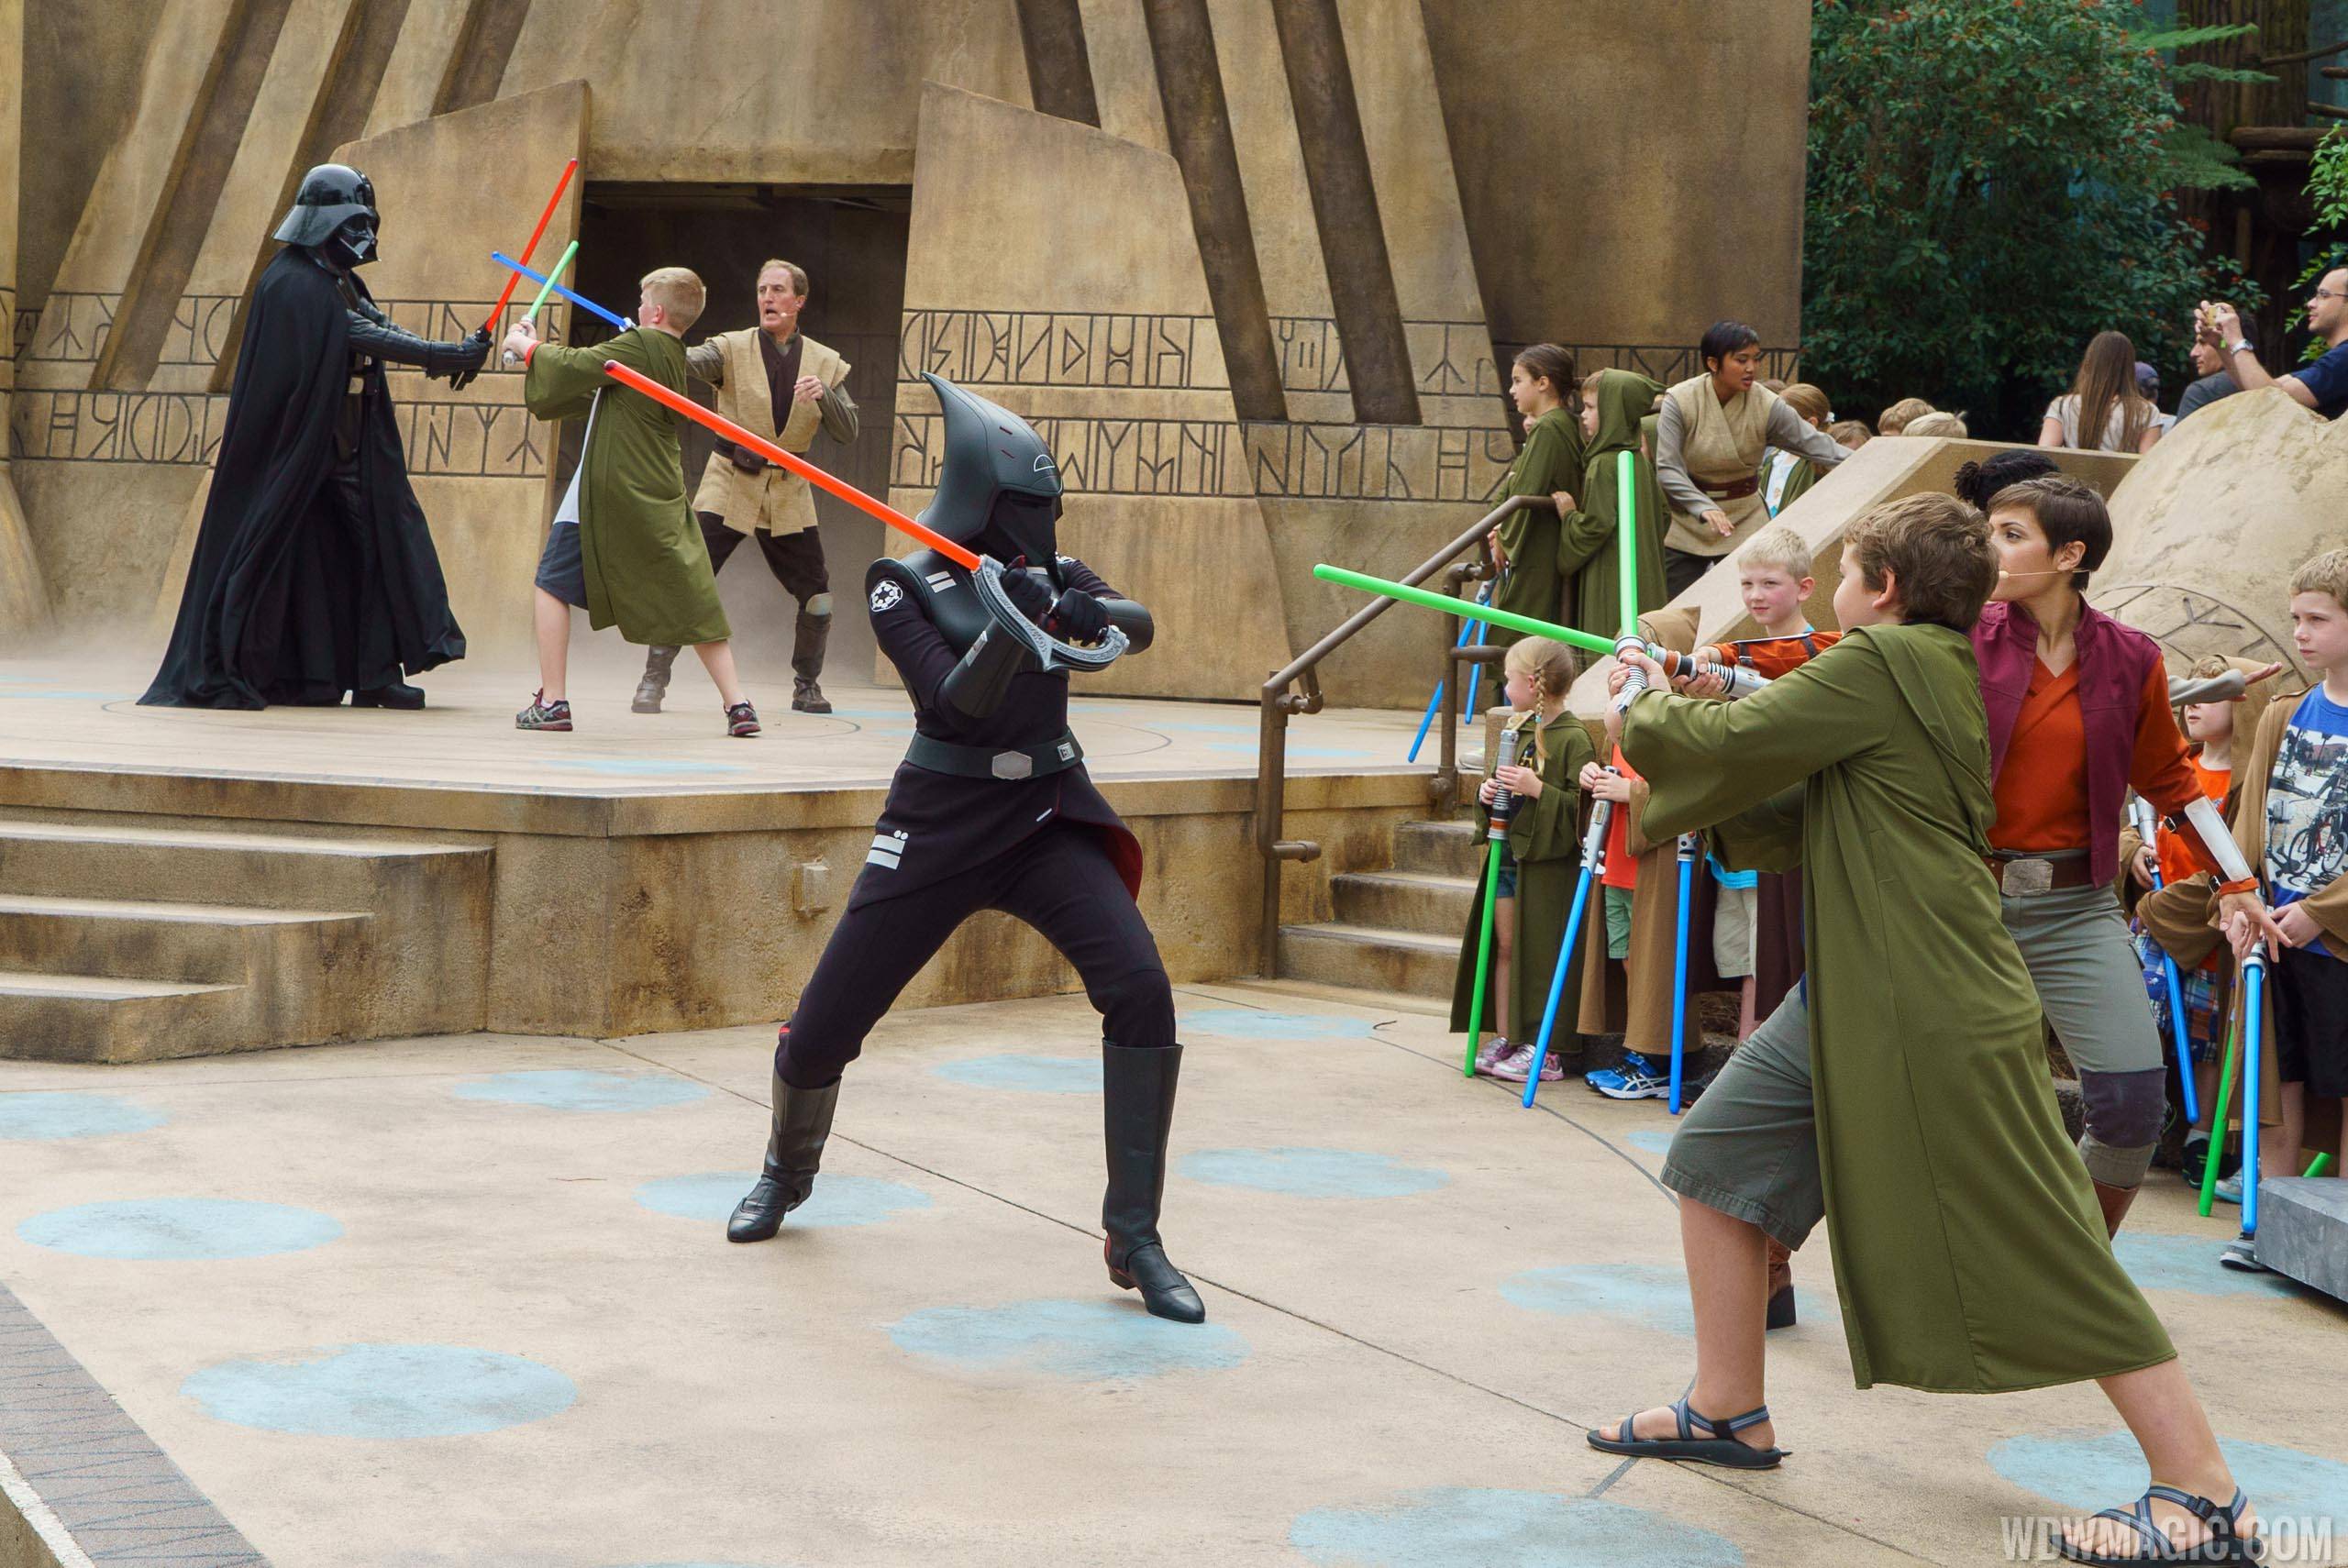 VIDEO - Jedi Training Trials of the Temple arrives at Disney's Hollywood Studios